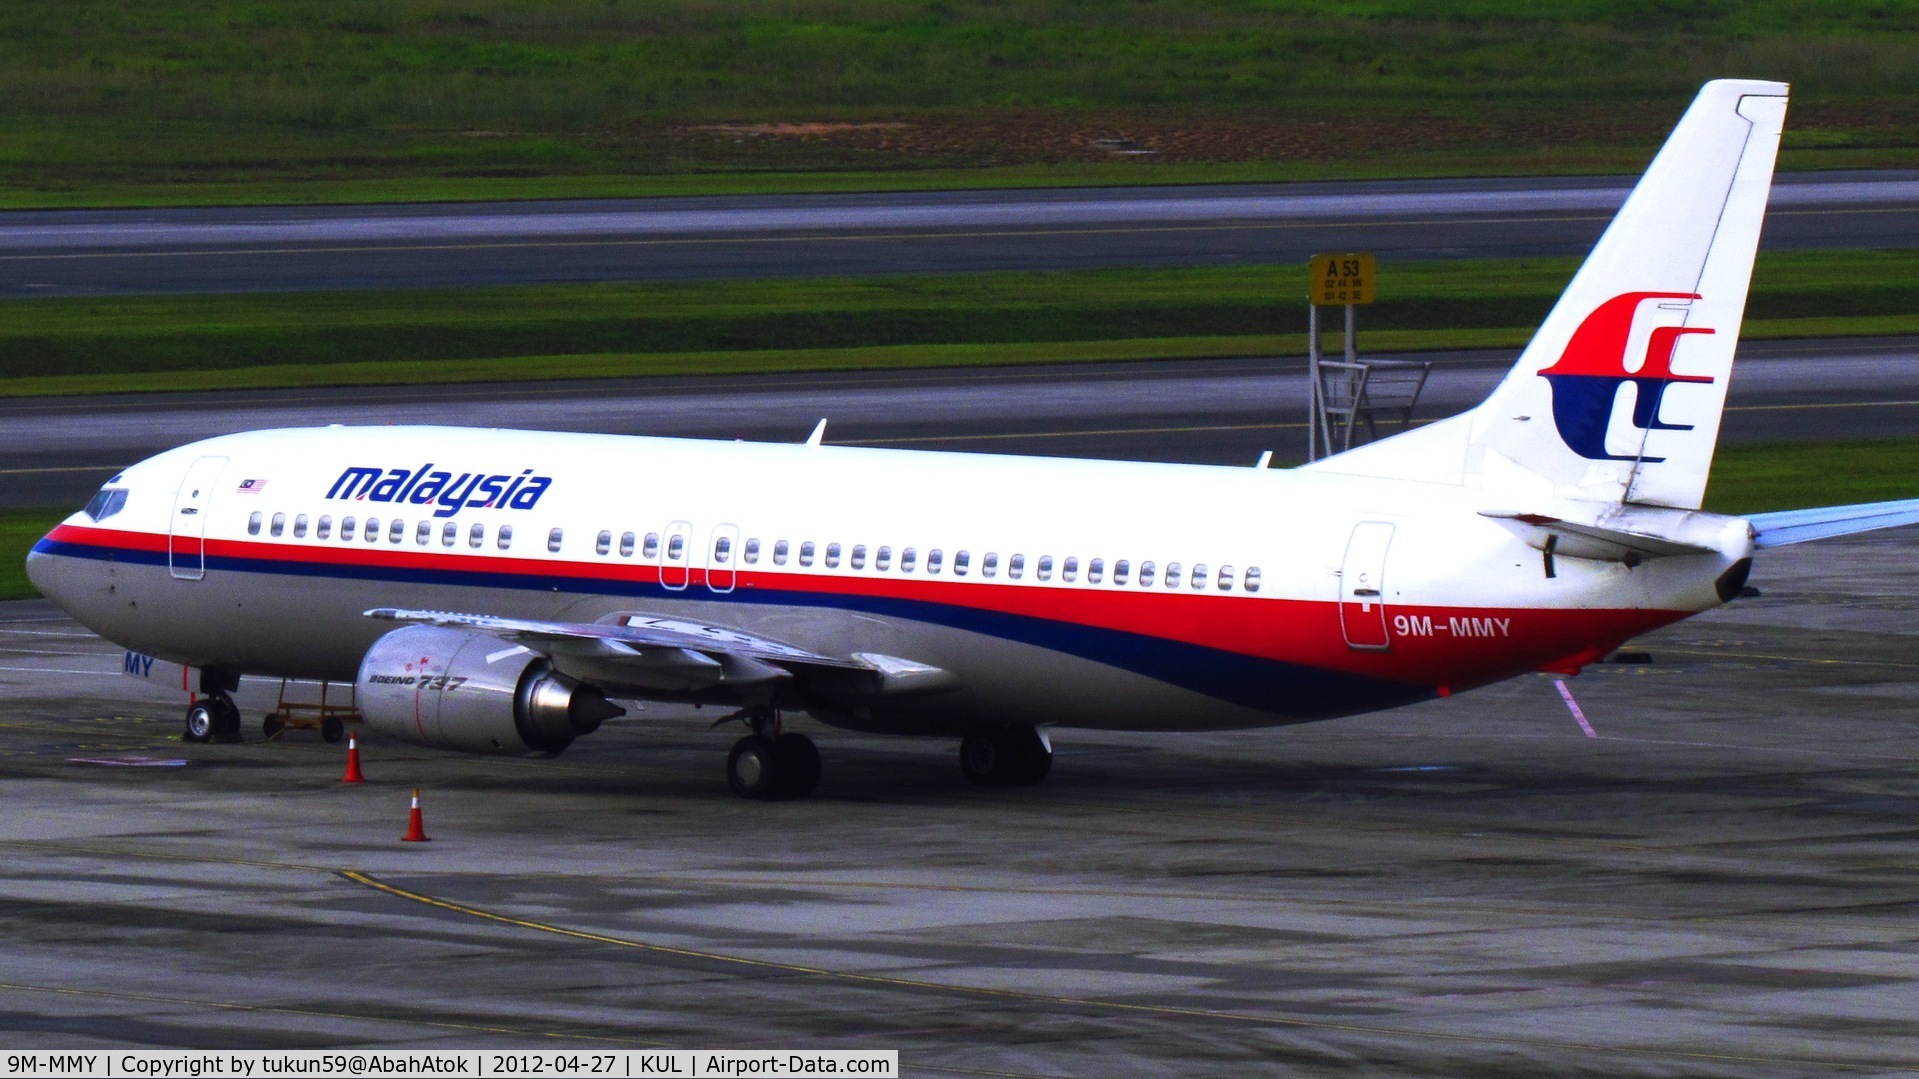 9M-MMY, Boeing 737-4H6 C/N 26455, Malaysia Airlines